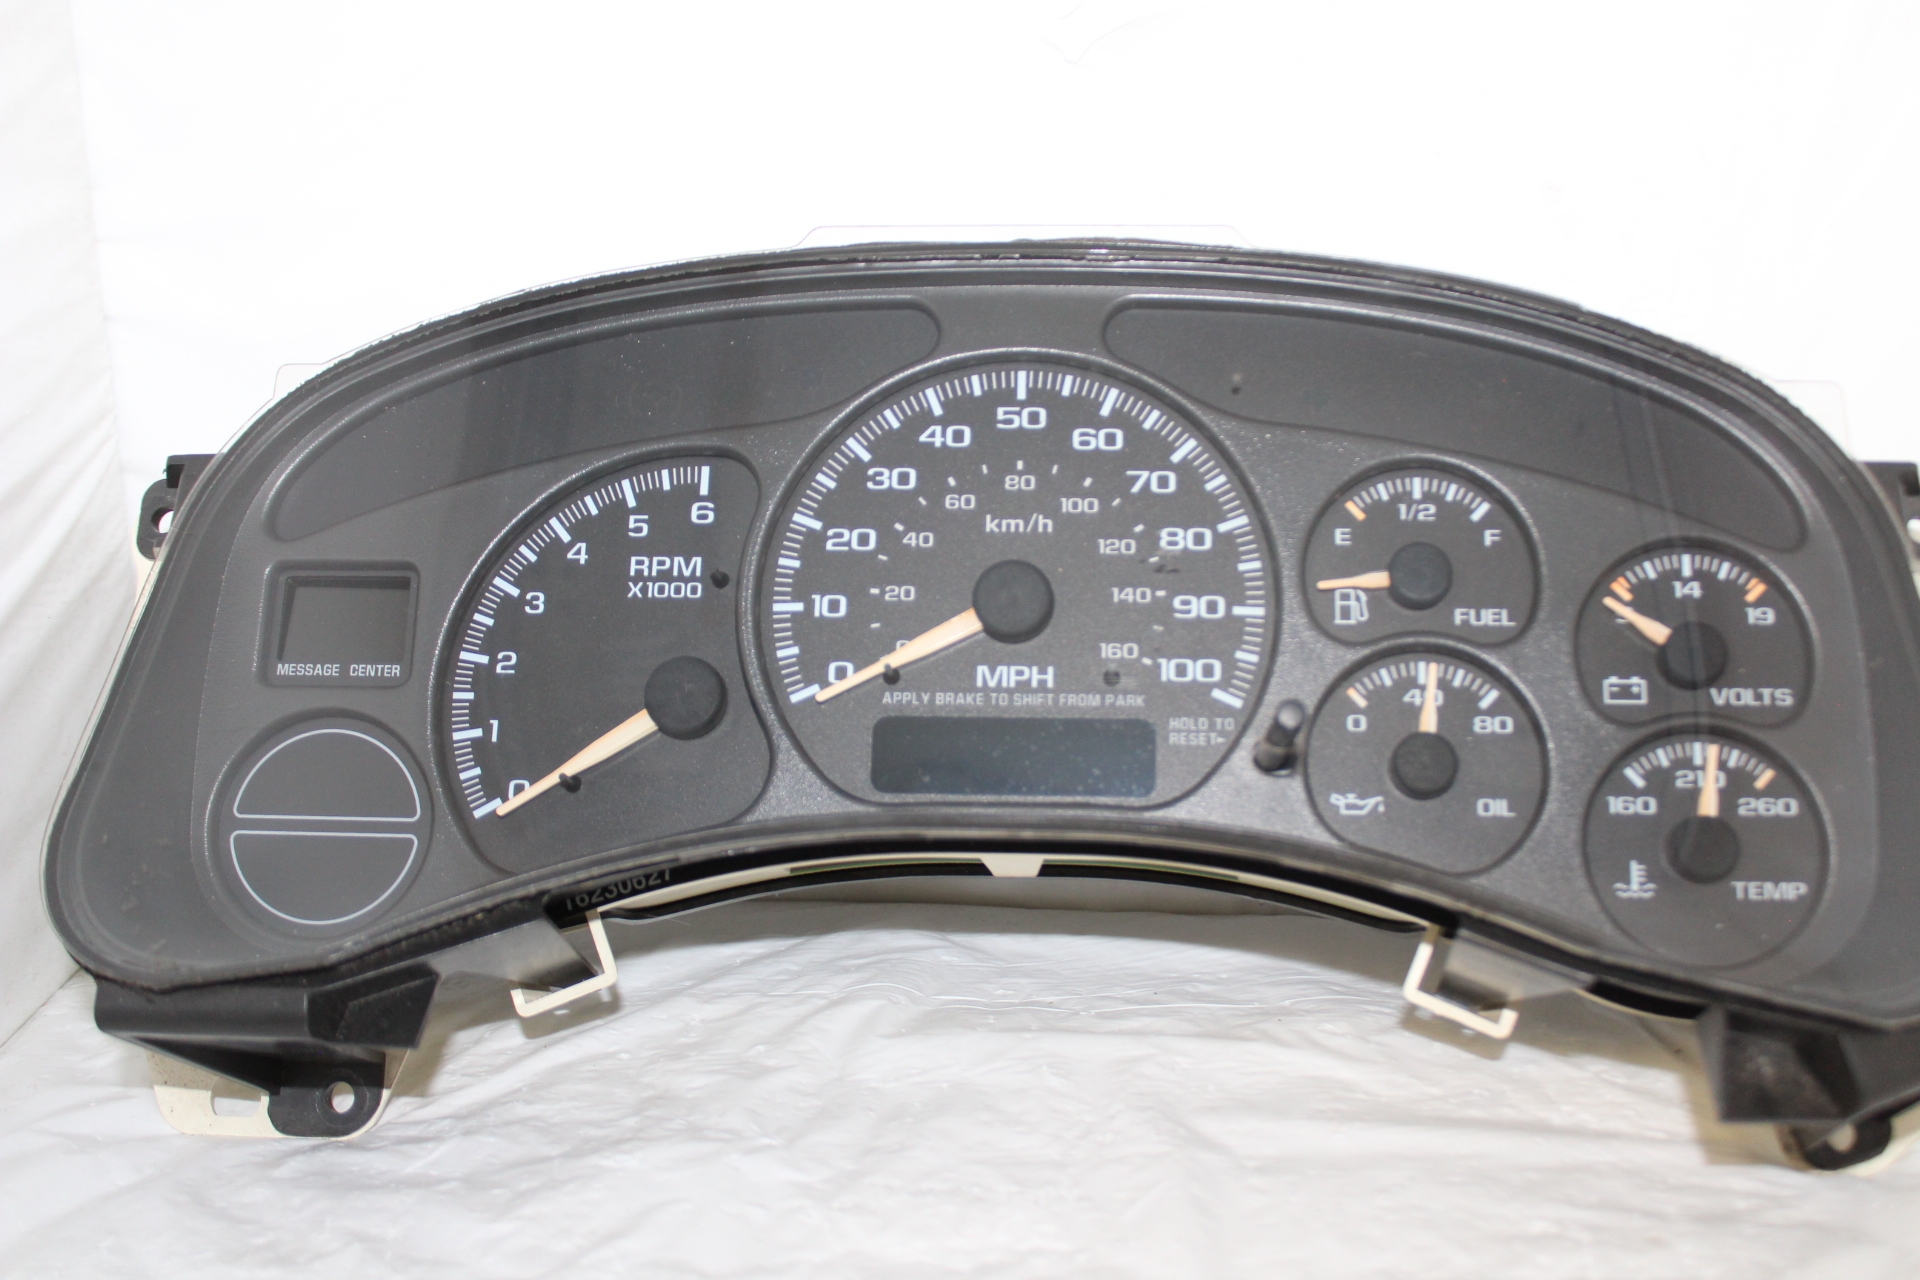 Used 2000 Chevy Silverado 1500 Instrument Cluster, Automatic